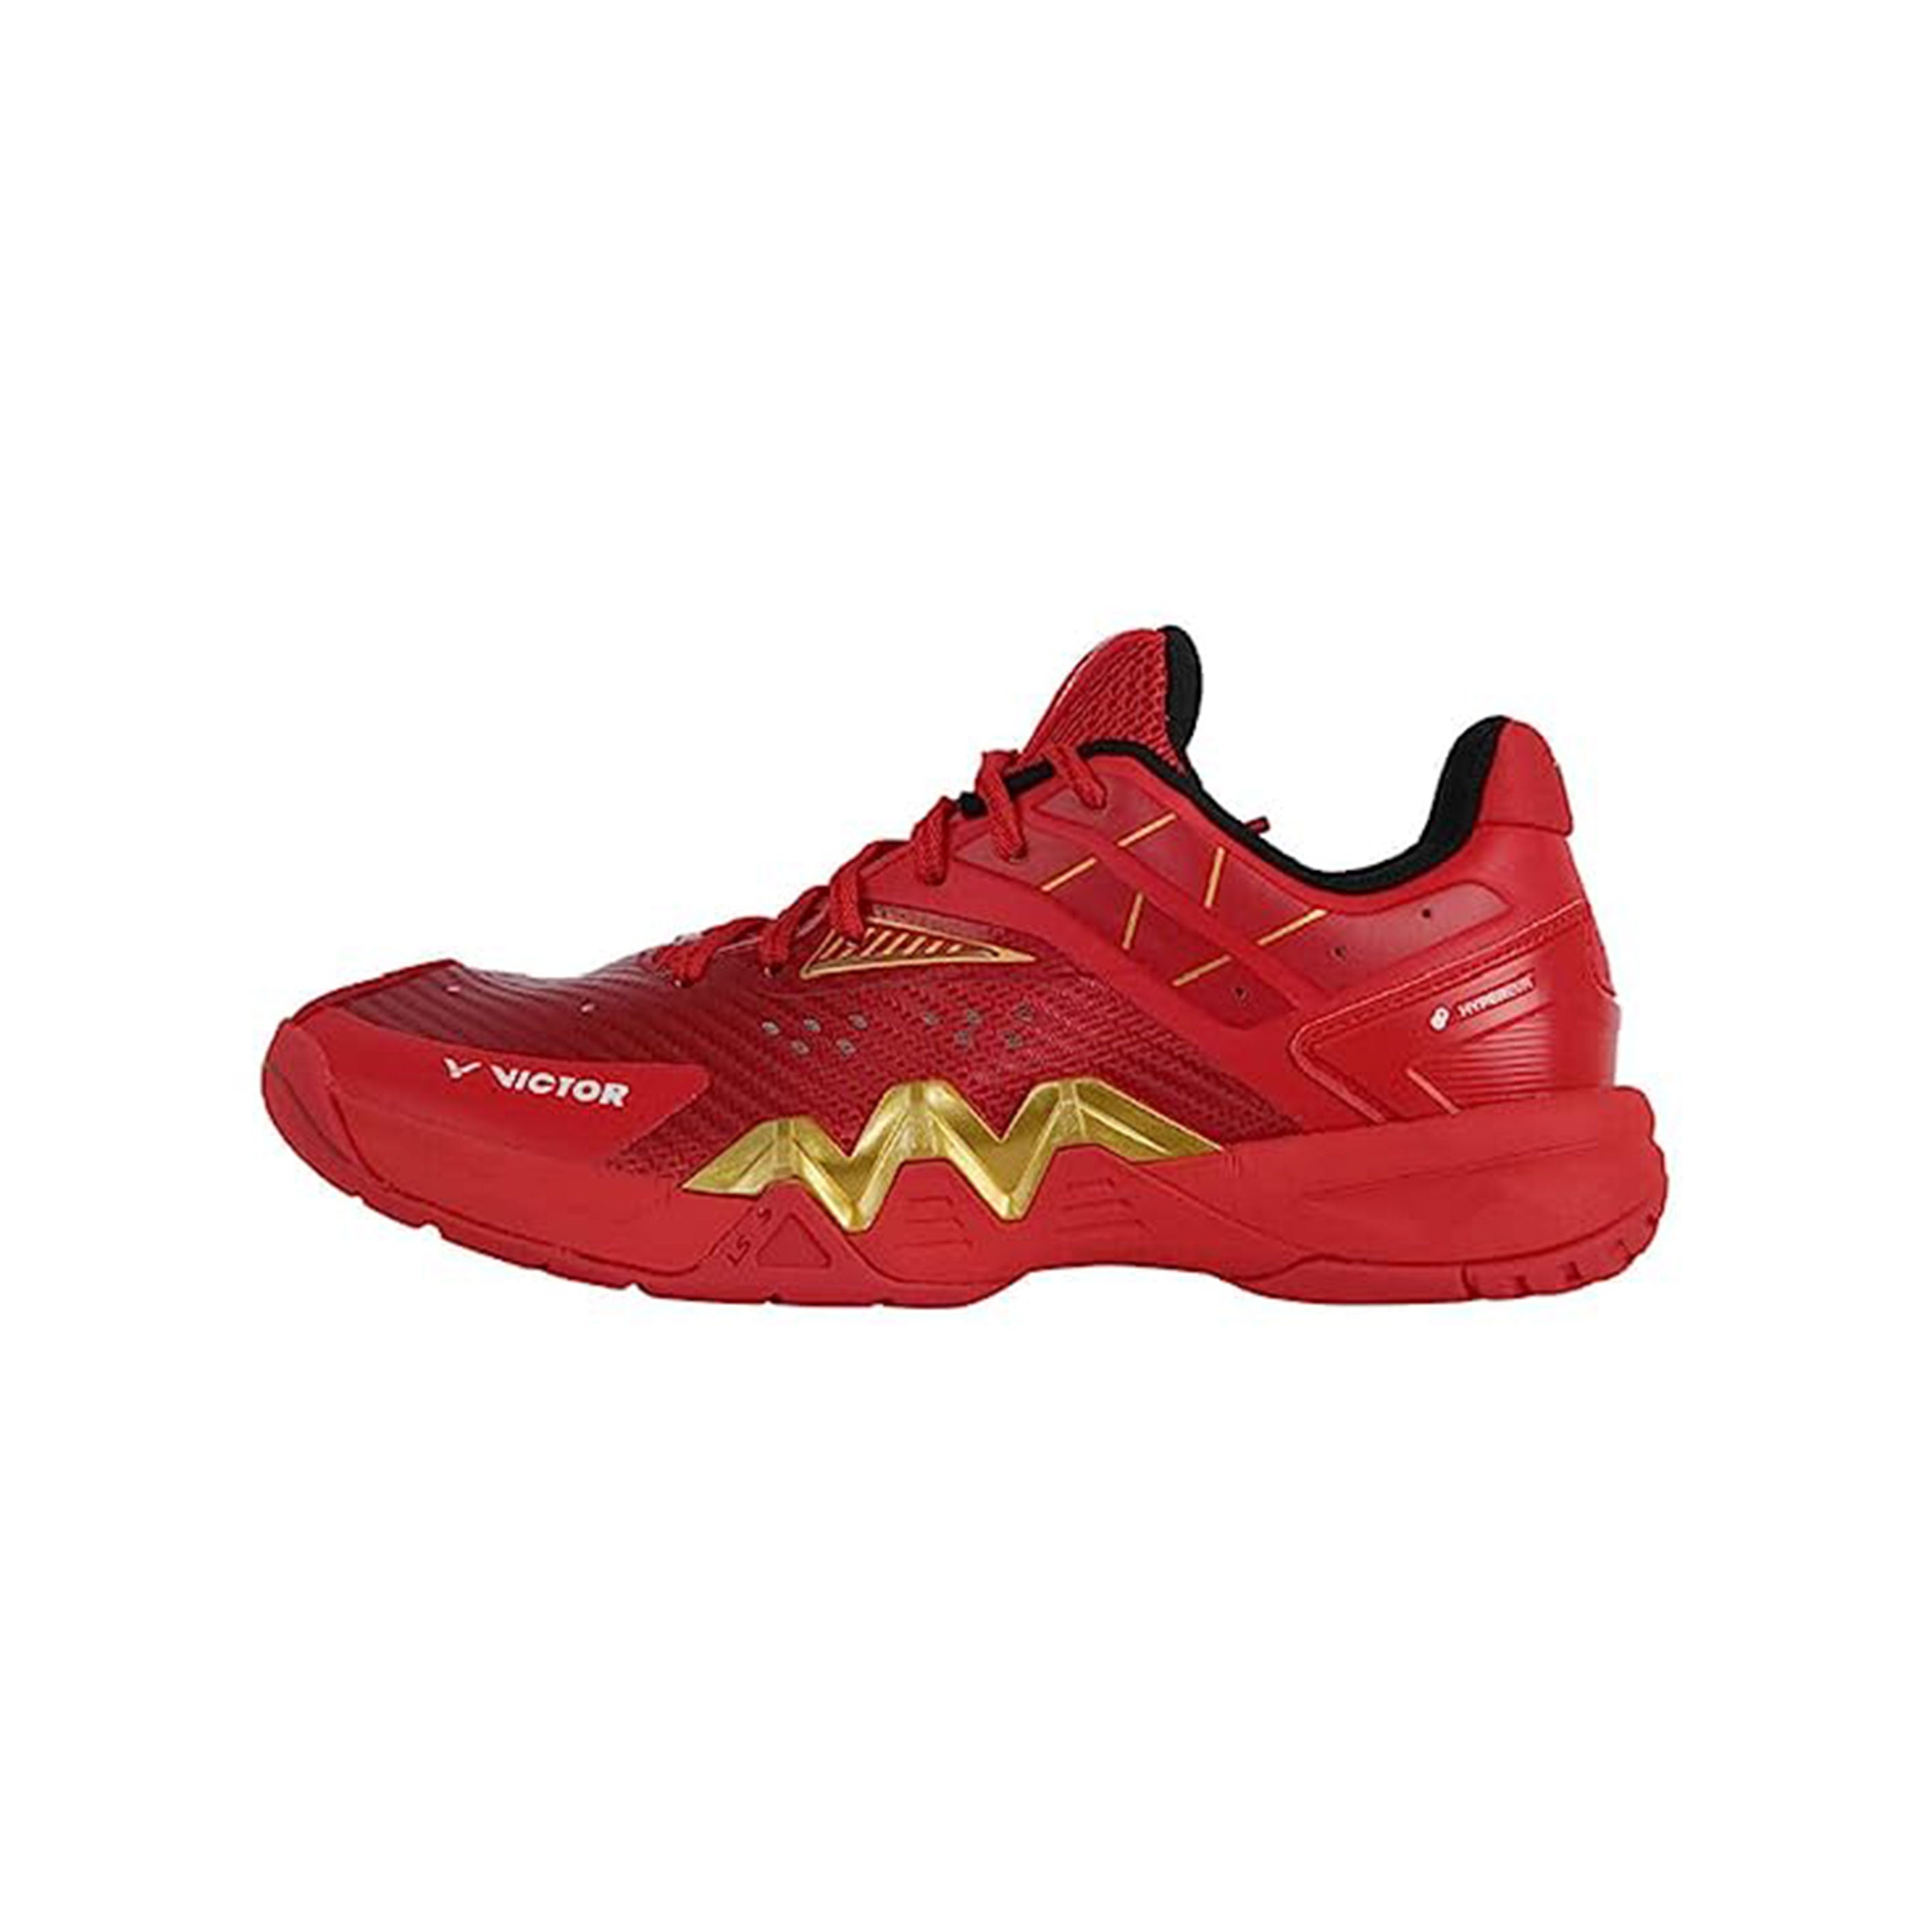 P8500II-D Support Series Professional Badminton Shoes